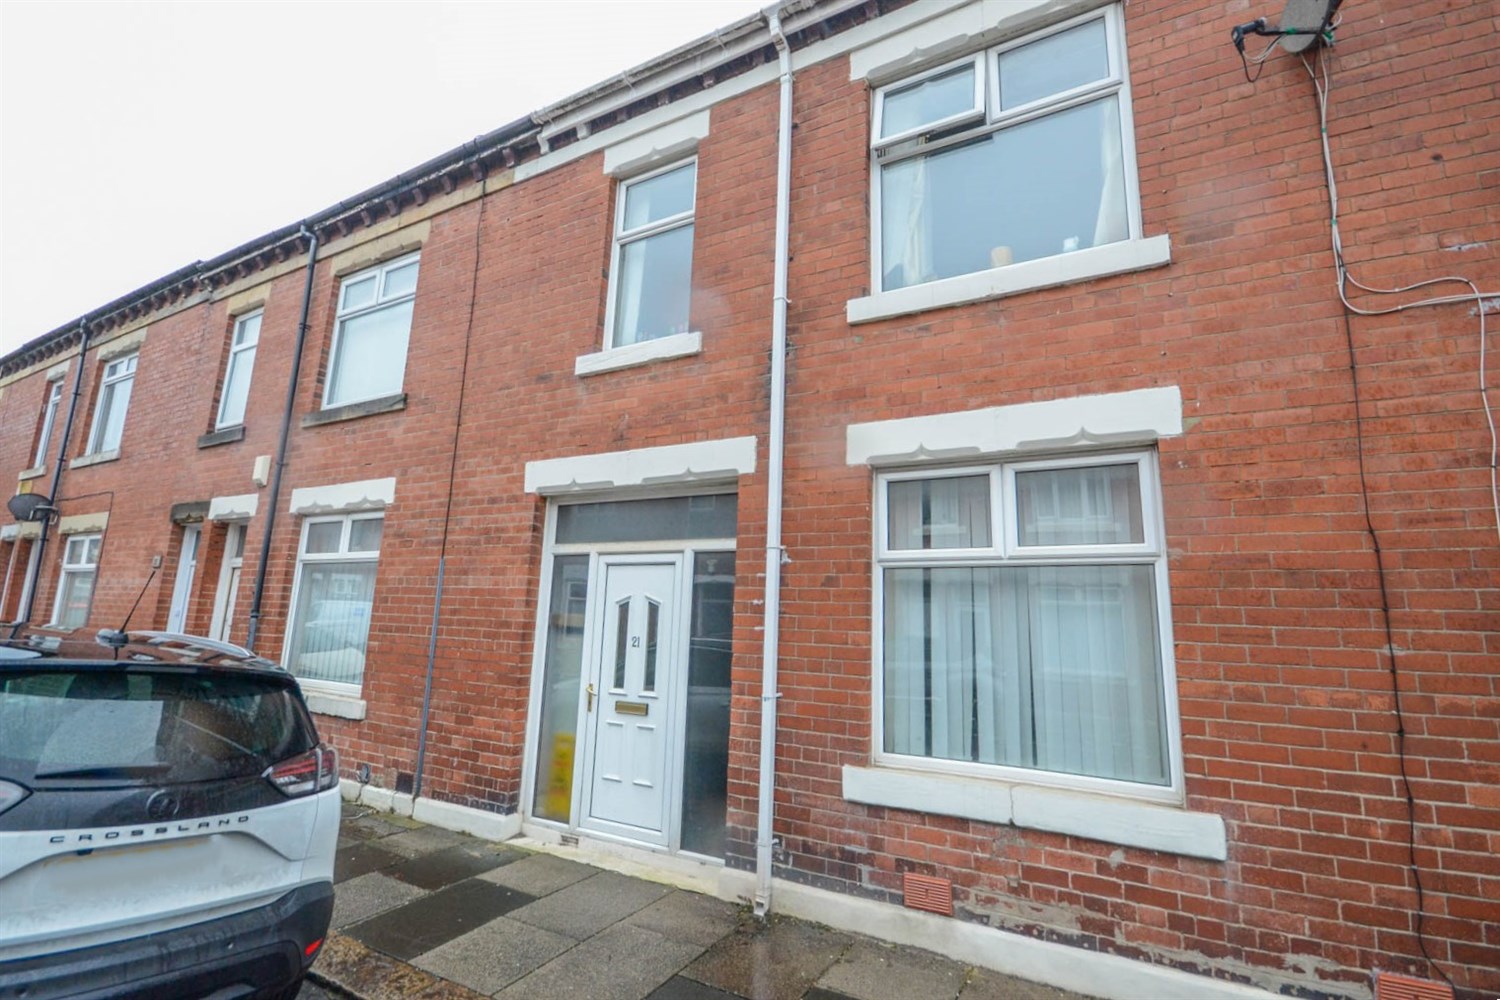 3 bed house for sale in Grey Street, Wallsend - Property Image 1